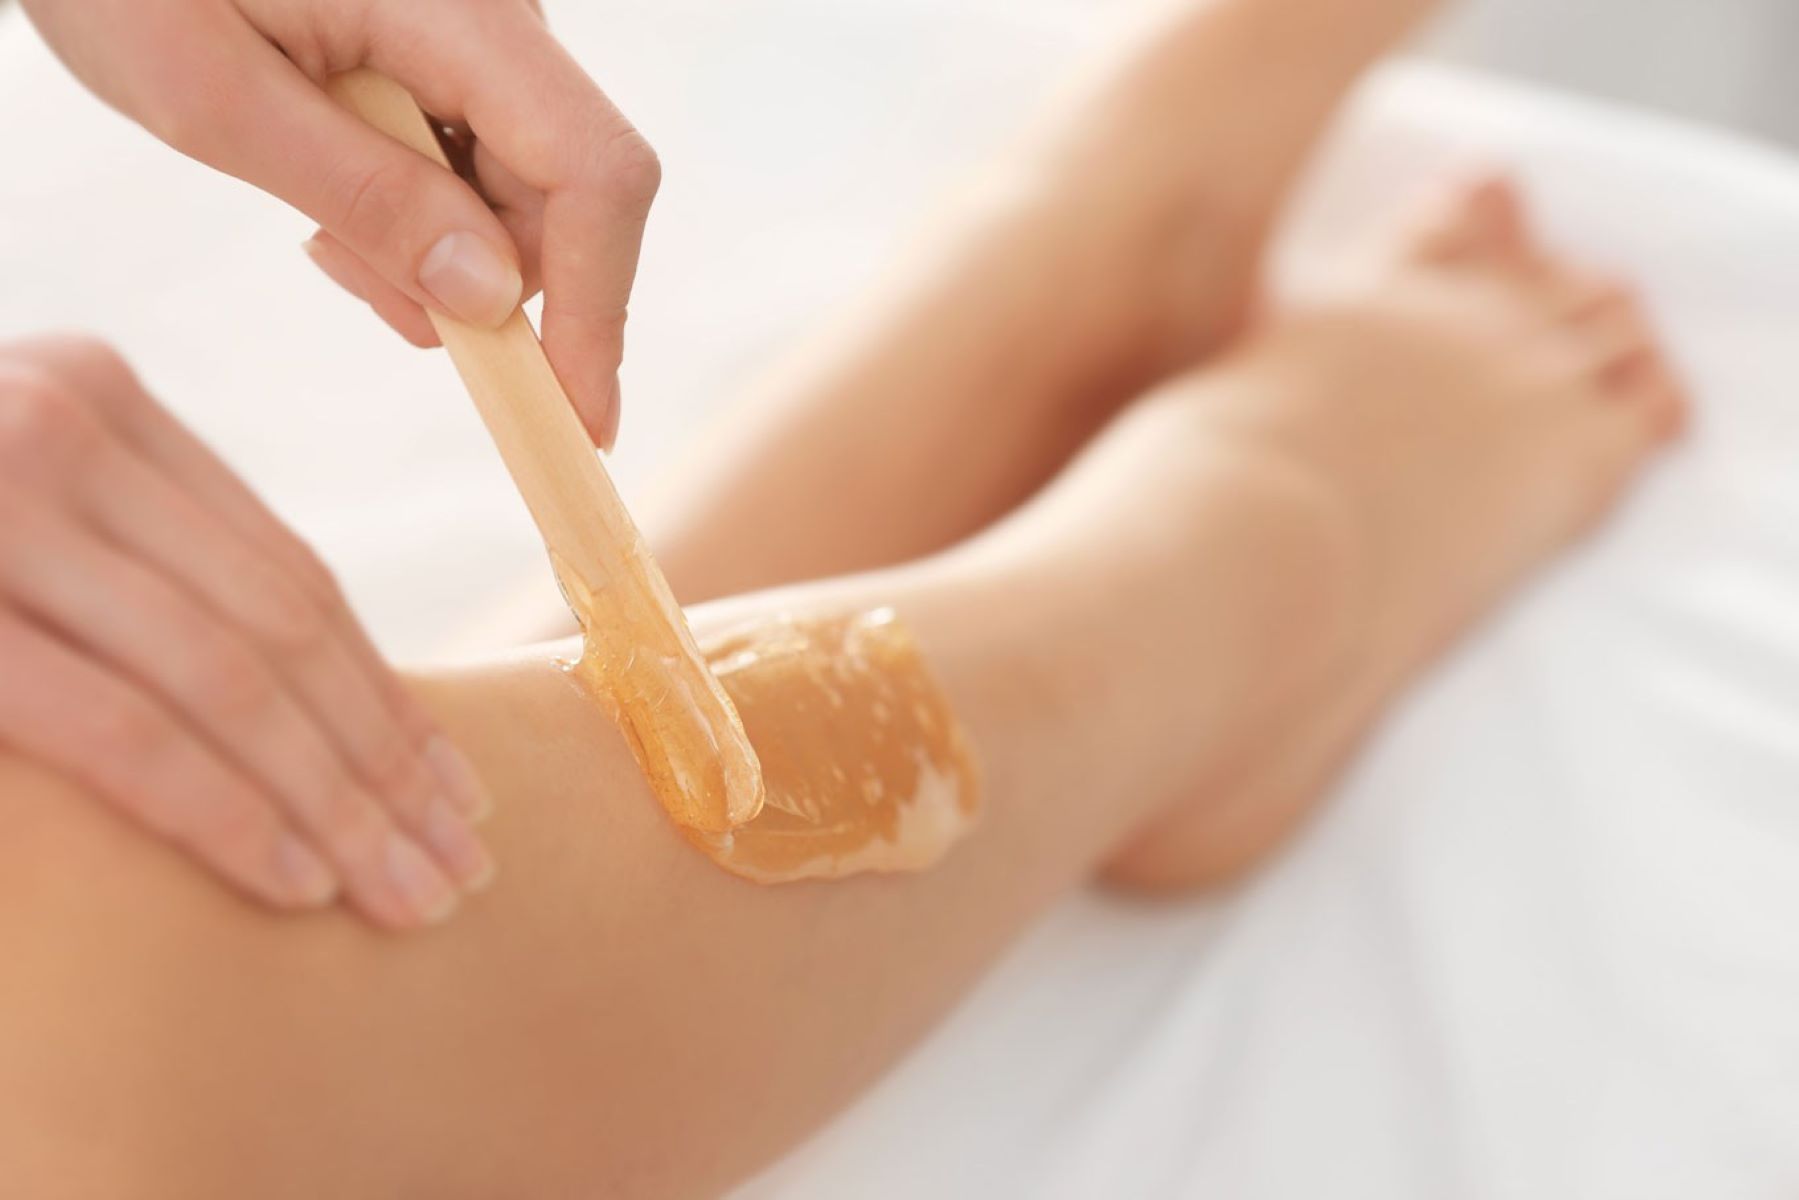 Men's Surprising Request After Waxing: You Won't Believe What They Ask For!